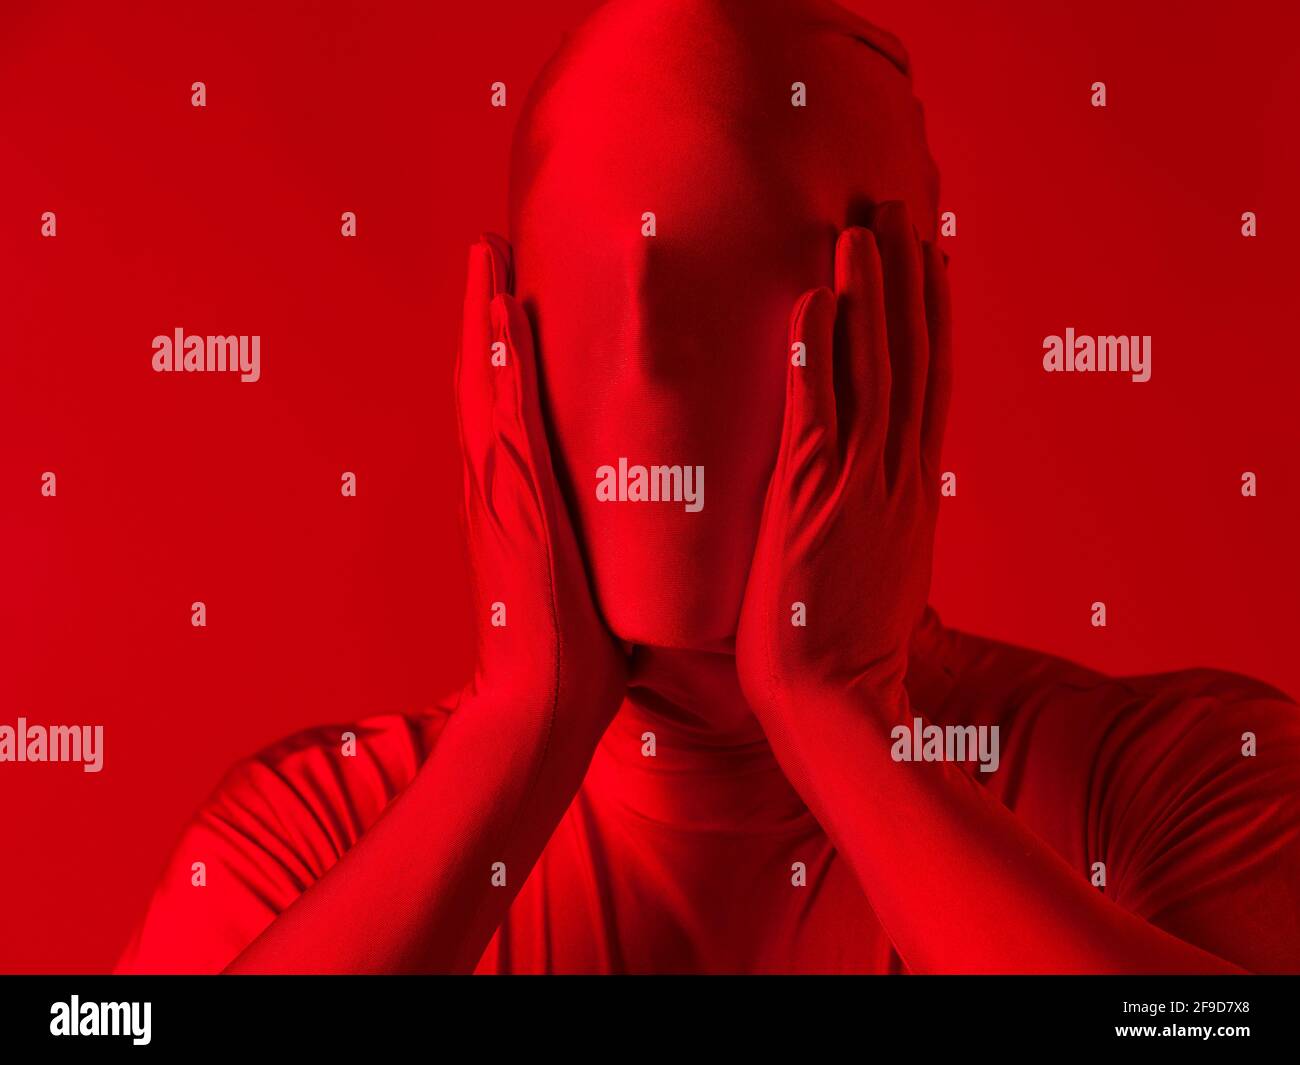 A screaming man in a red full suit, on a red background. The concept of pain and sadness and irritation. Stock Photo